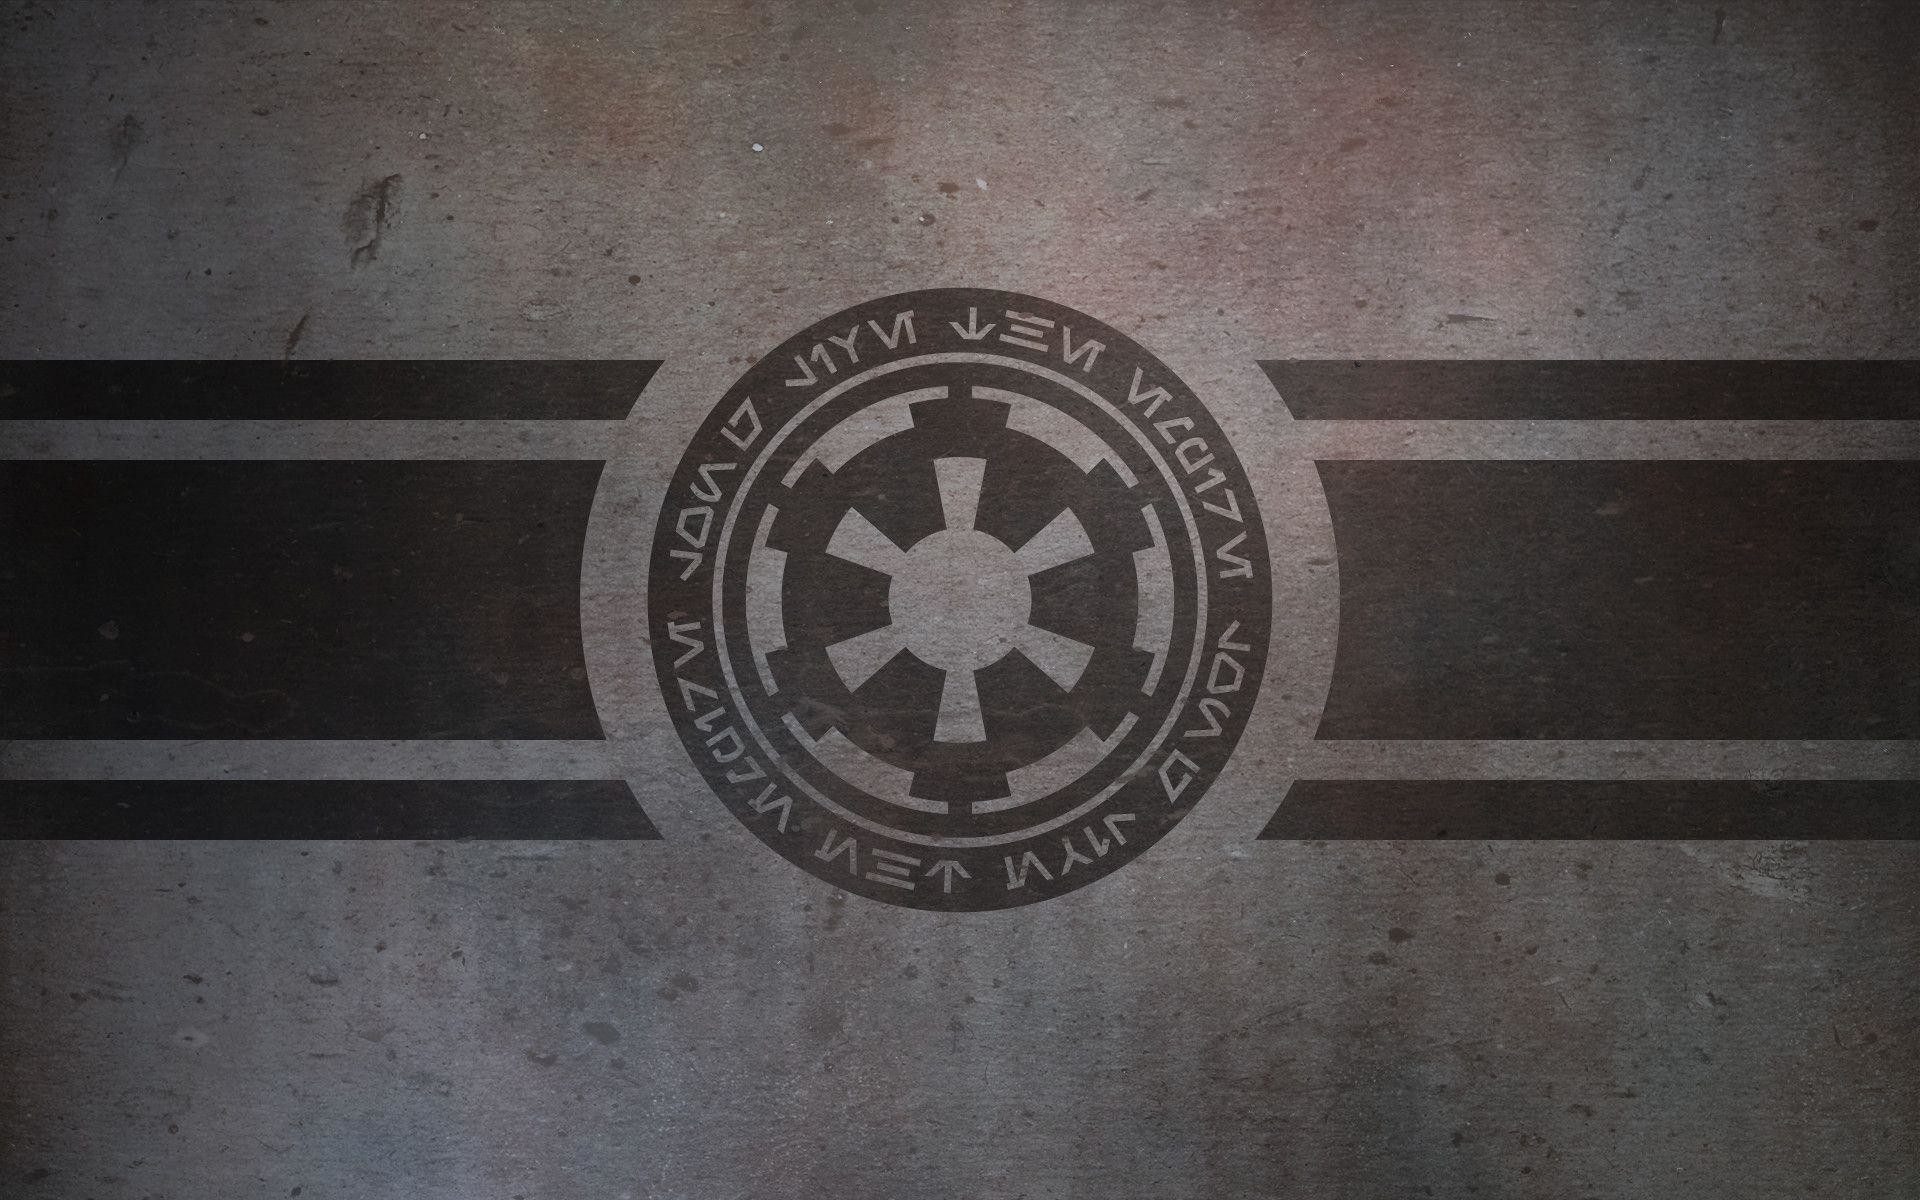 Star Wars Imperial Wallpaper 69 images